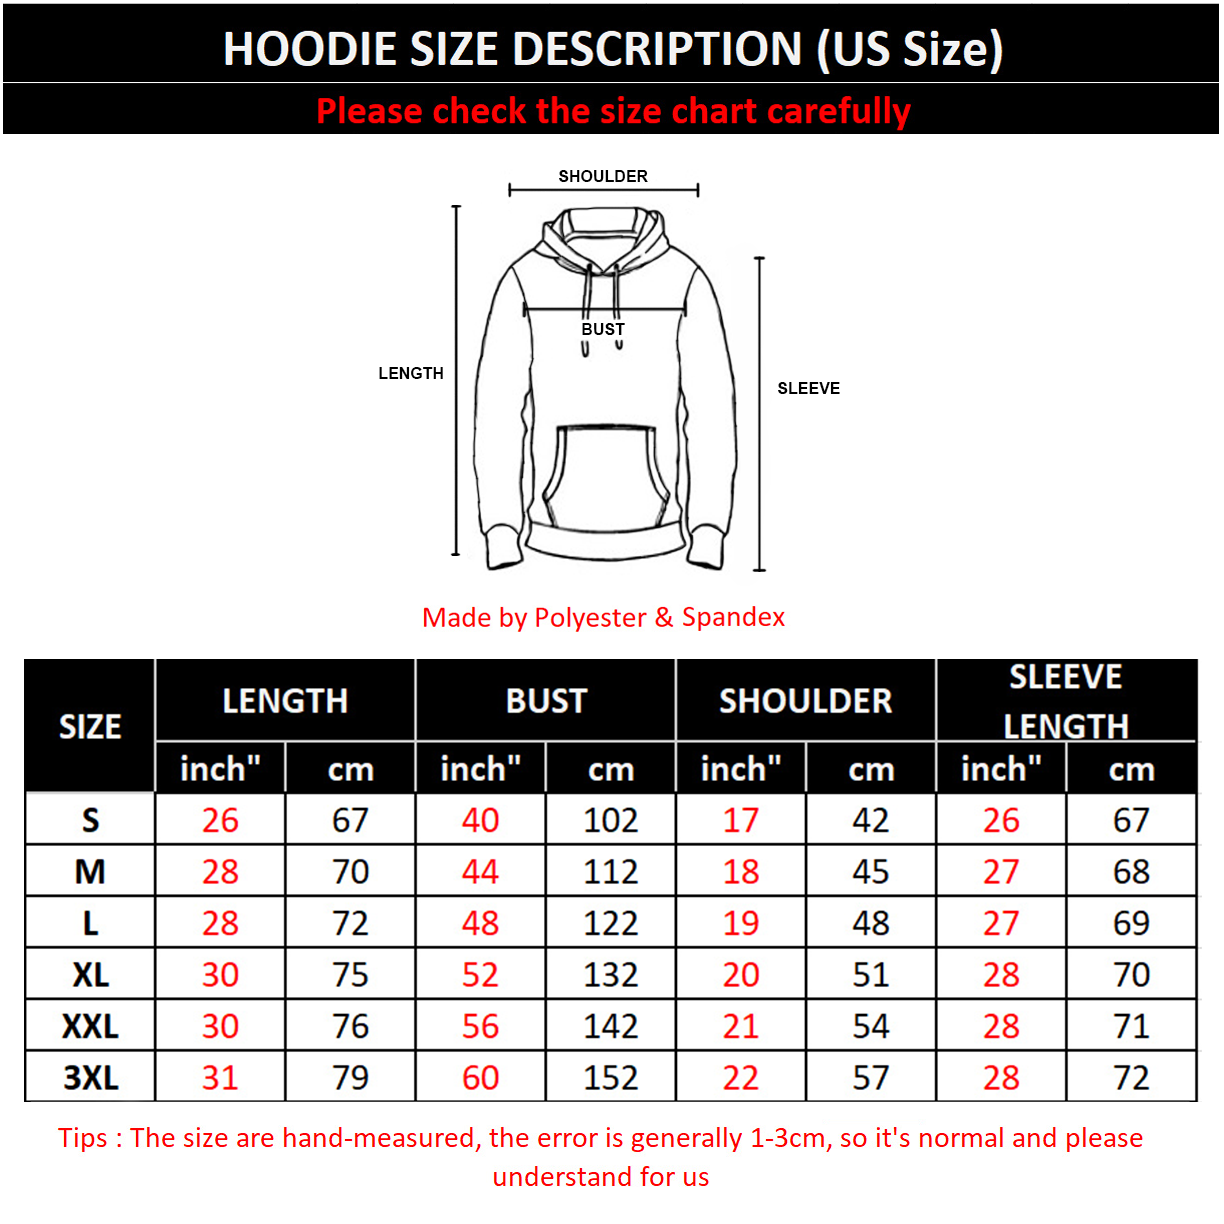 Horse Hoodie - All Over V5